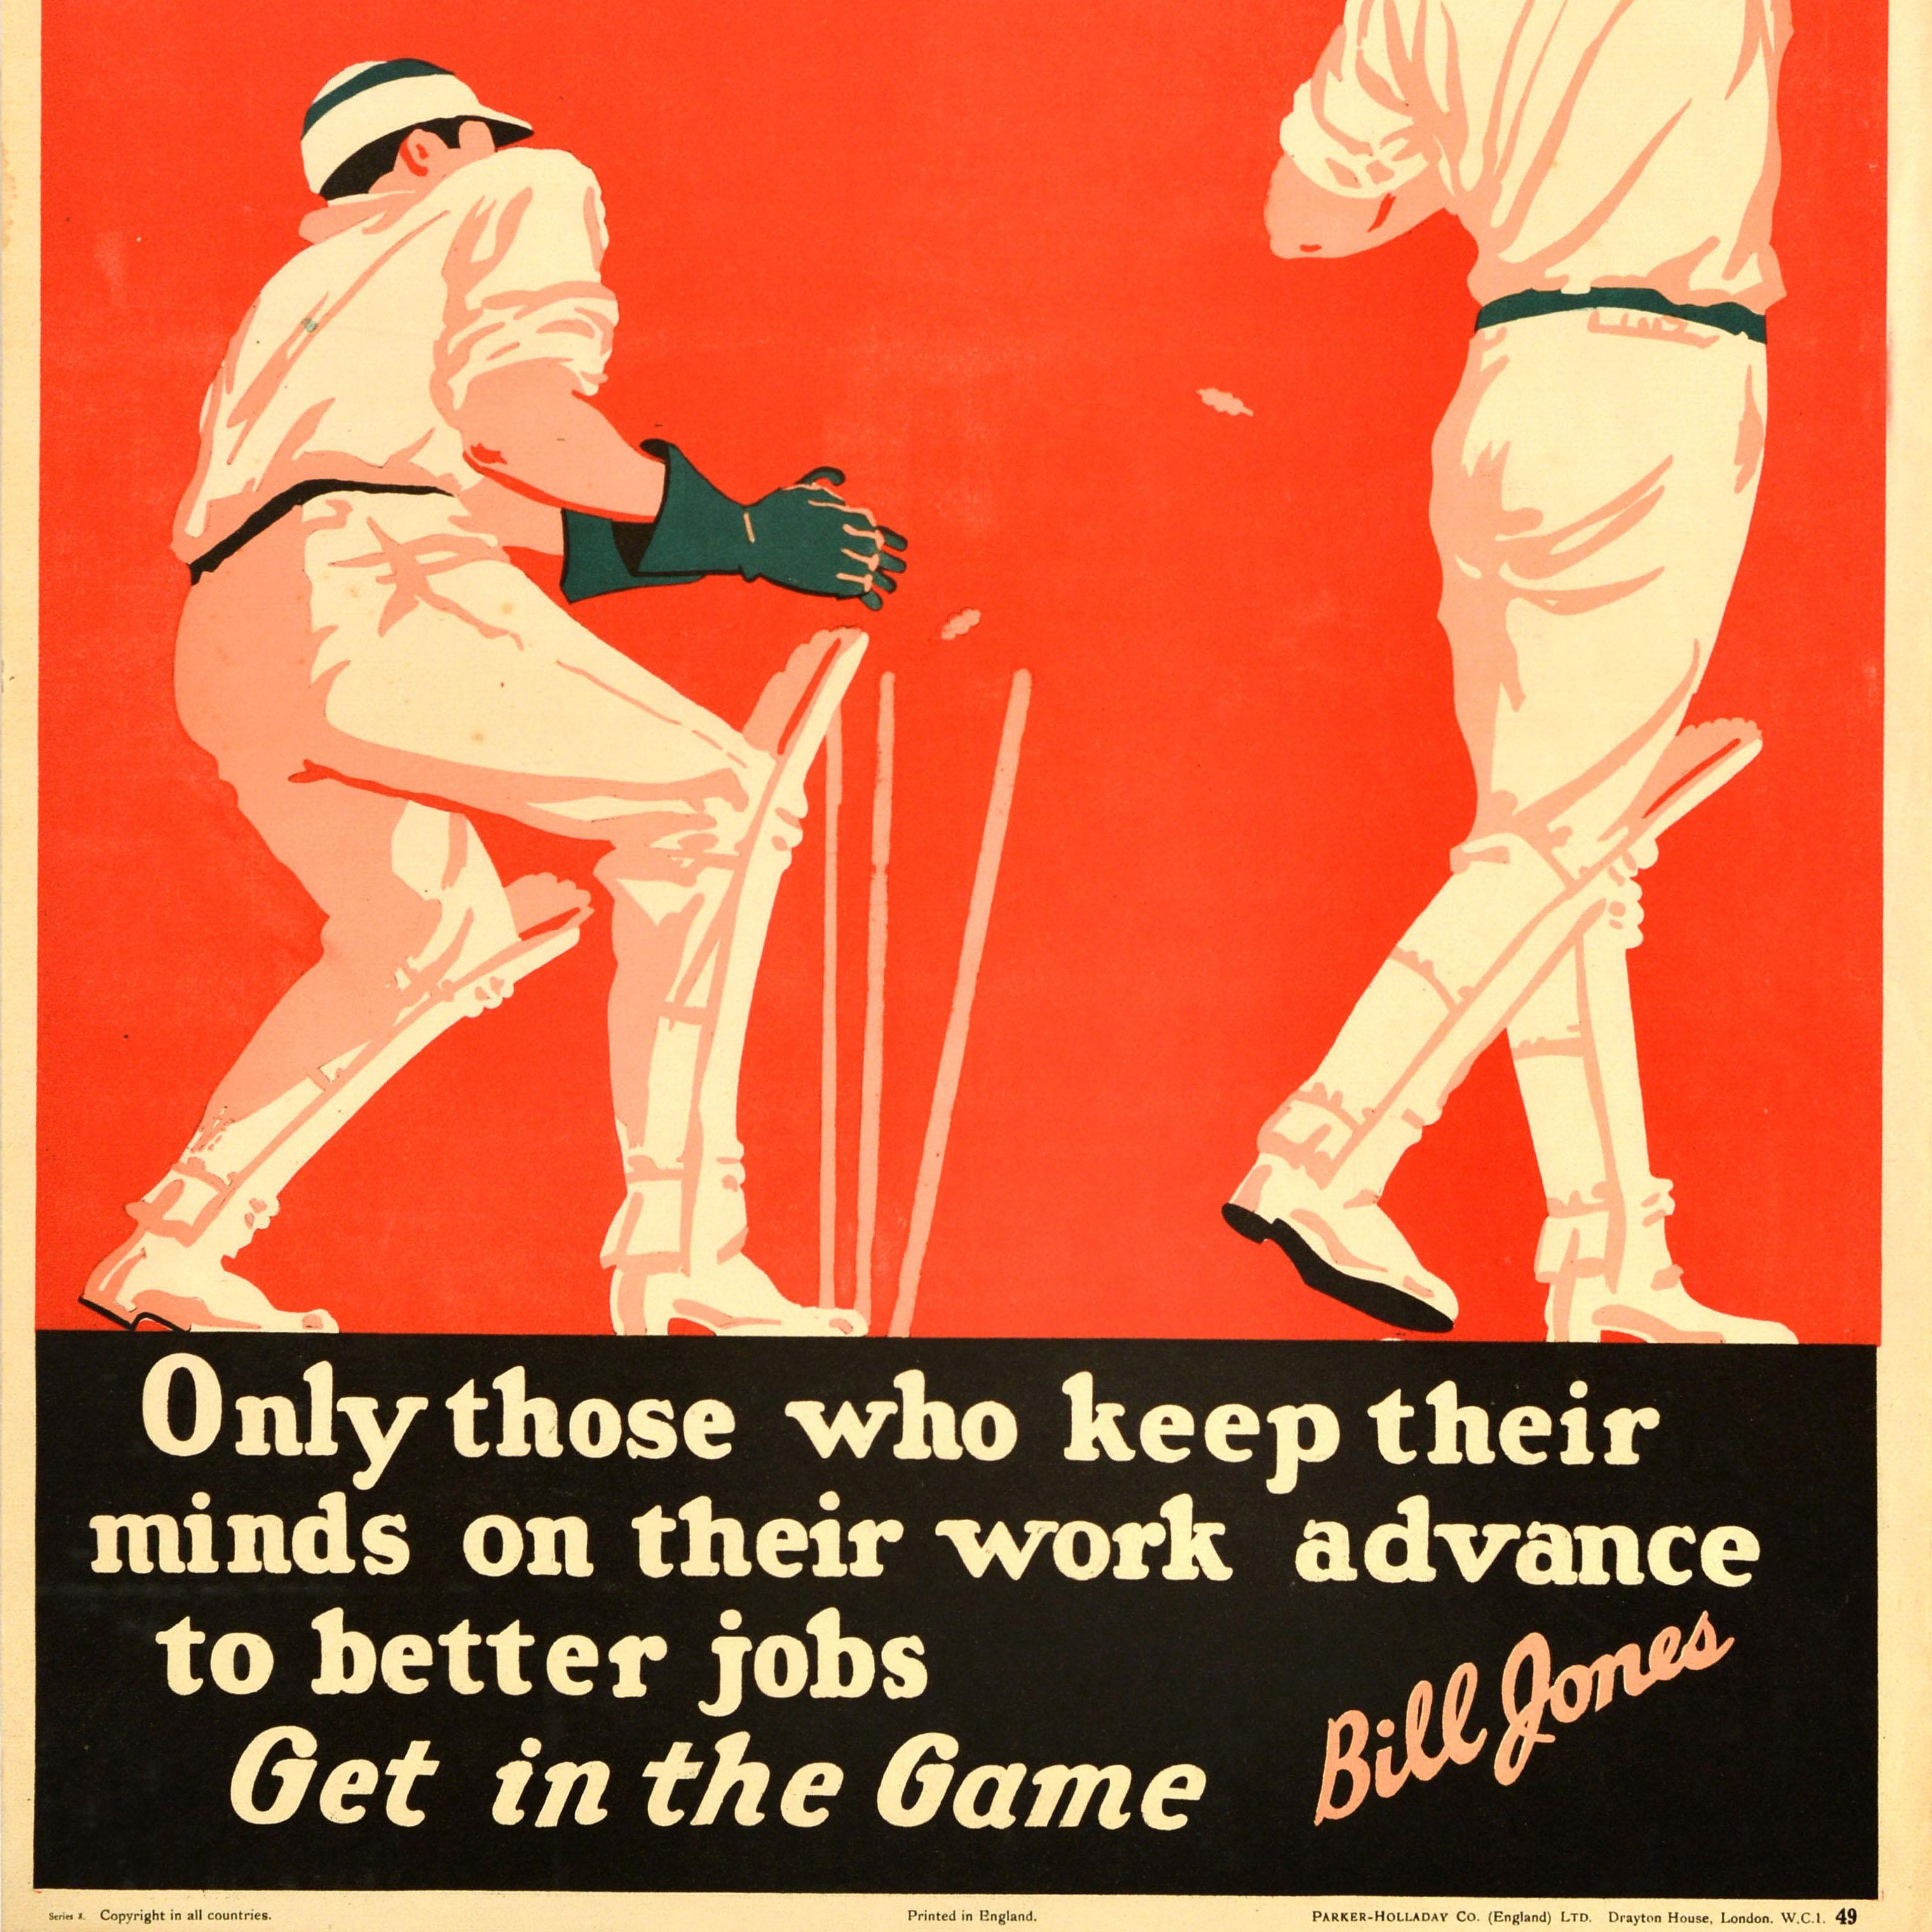 Original vintage workplace motivational poster - Caught napping ... Only those who keep their minds on their work advance to better jobs Get in the Game Bill Jones - featuring a sport themed illustration of cricket players set on a red background,